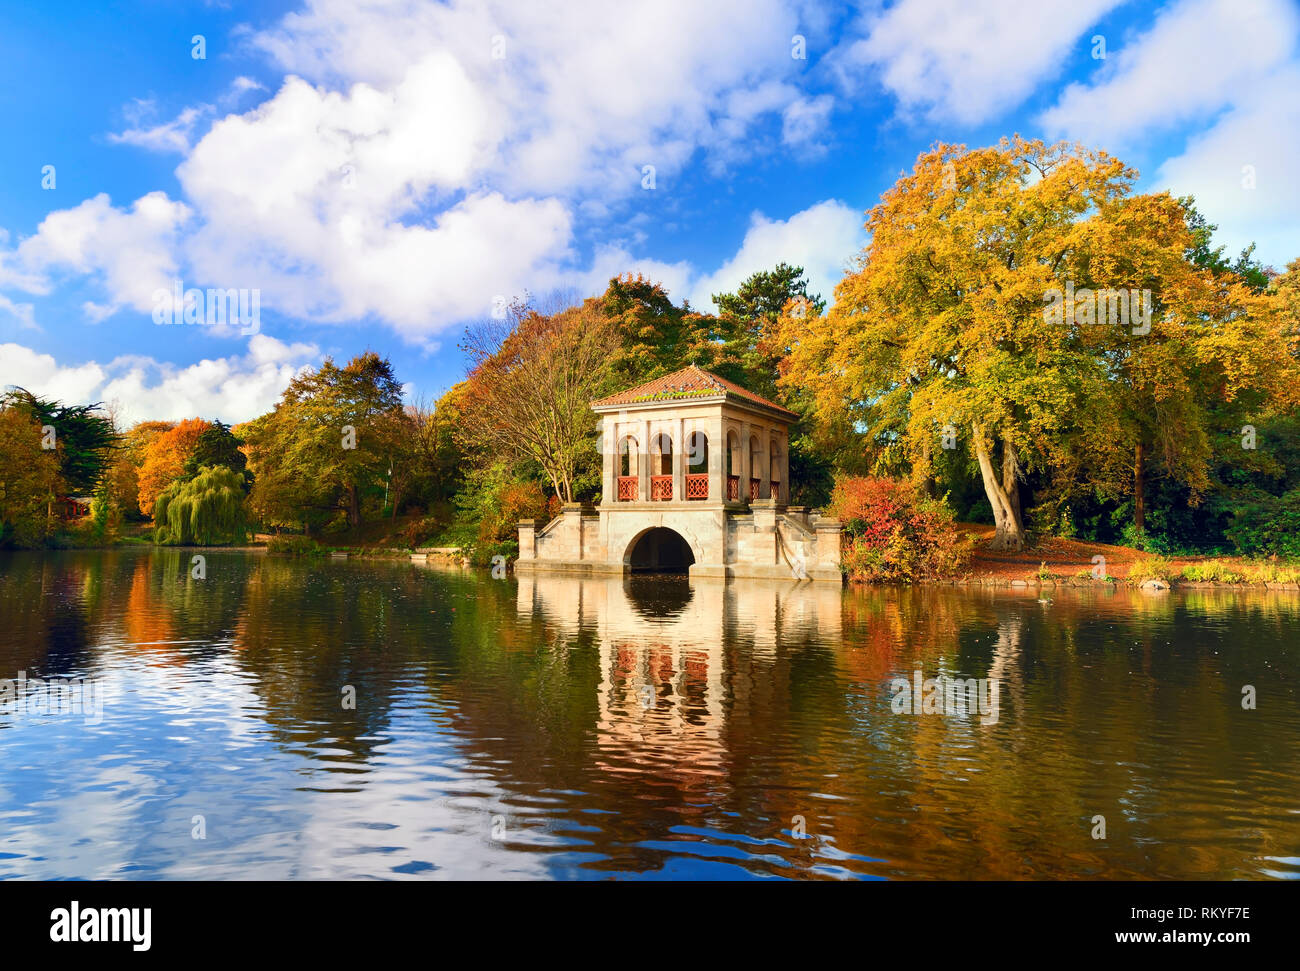 An autumn view of the Roman Boathouse and lake in Birkenhead Park in ...